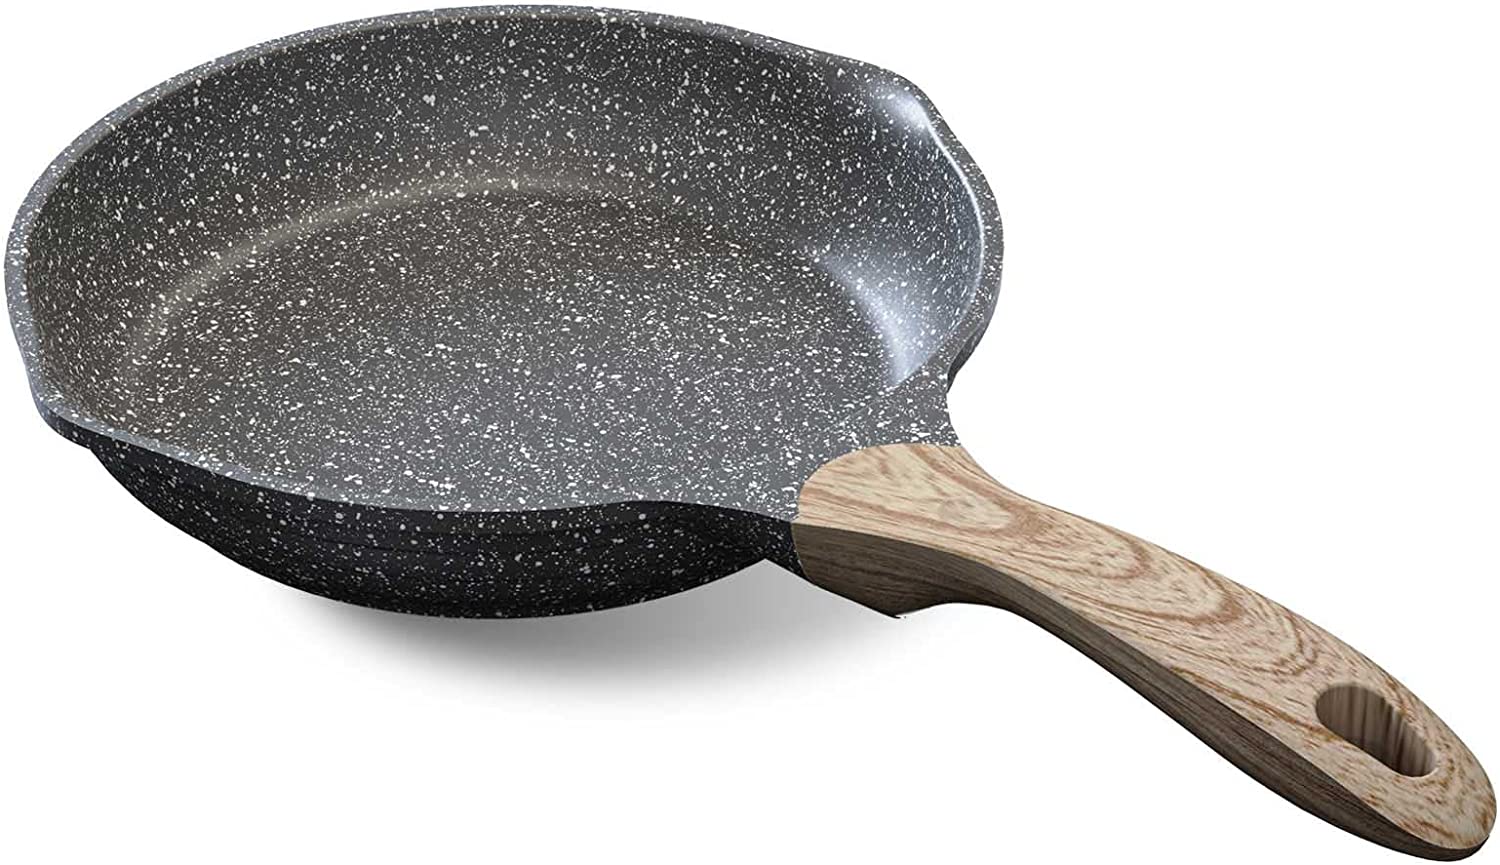 https://www.dontwasteyourmoney.com/wp-content/uploads/2020/05/jeetee-nonstick-soft-touch-handle-induction-stone-frying-pan-8-inch.jpg